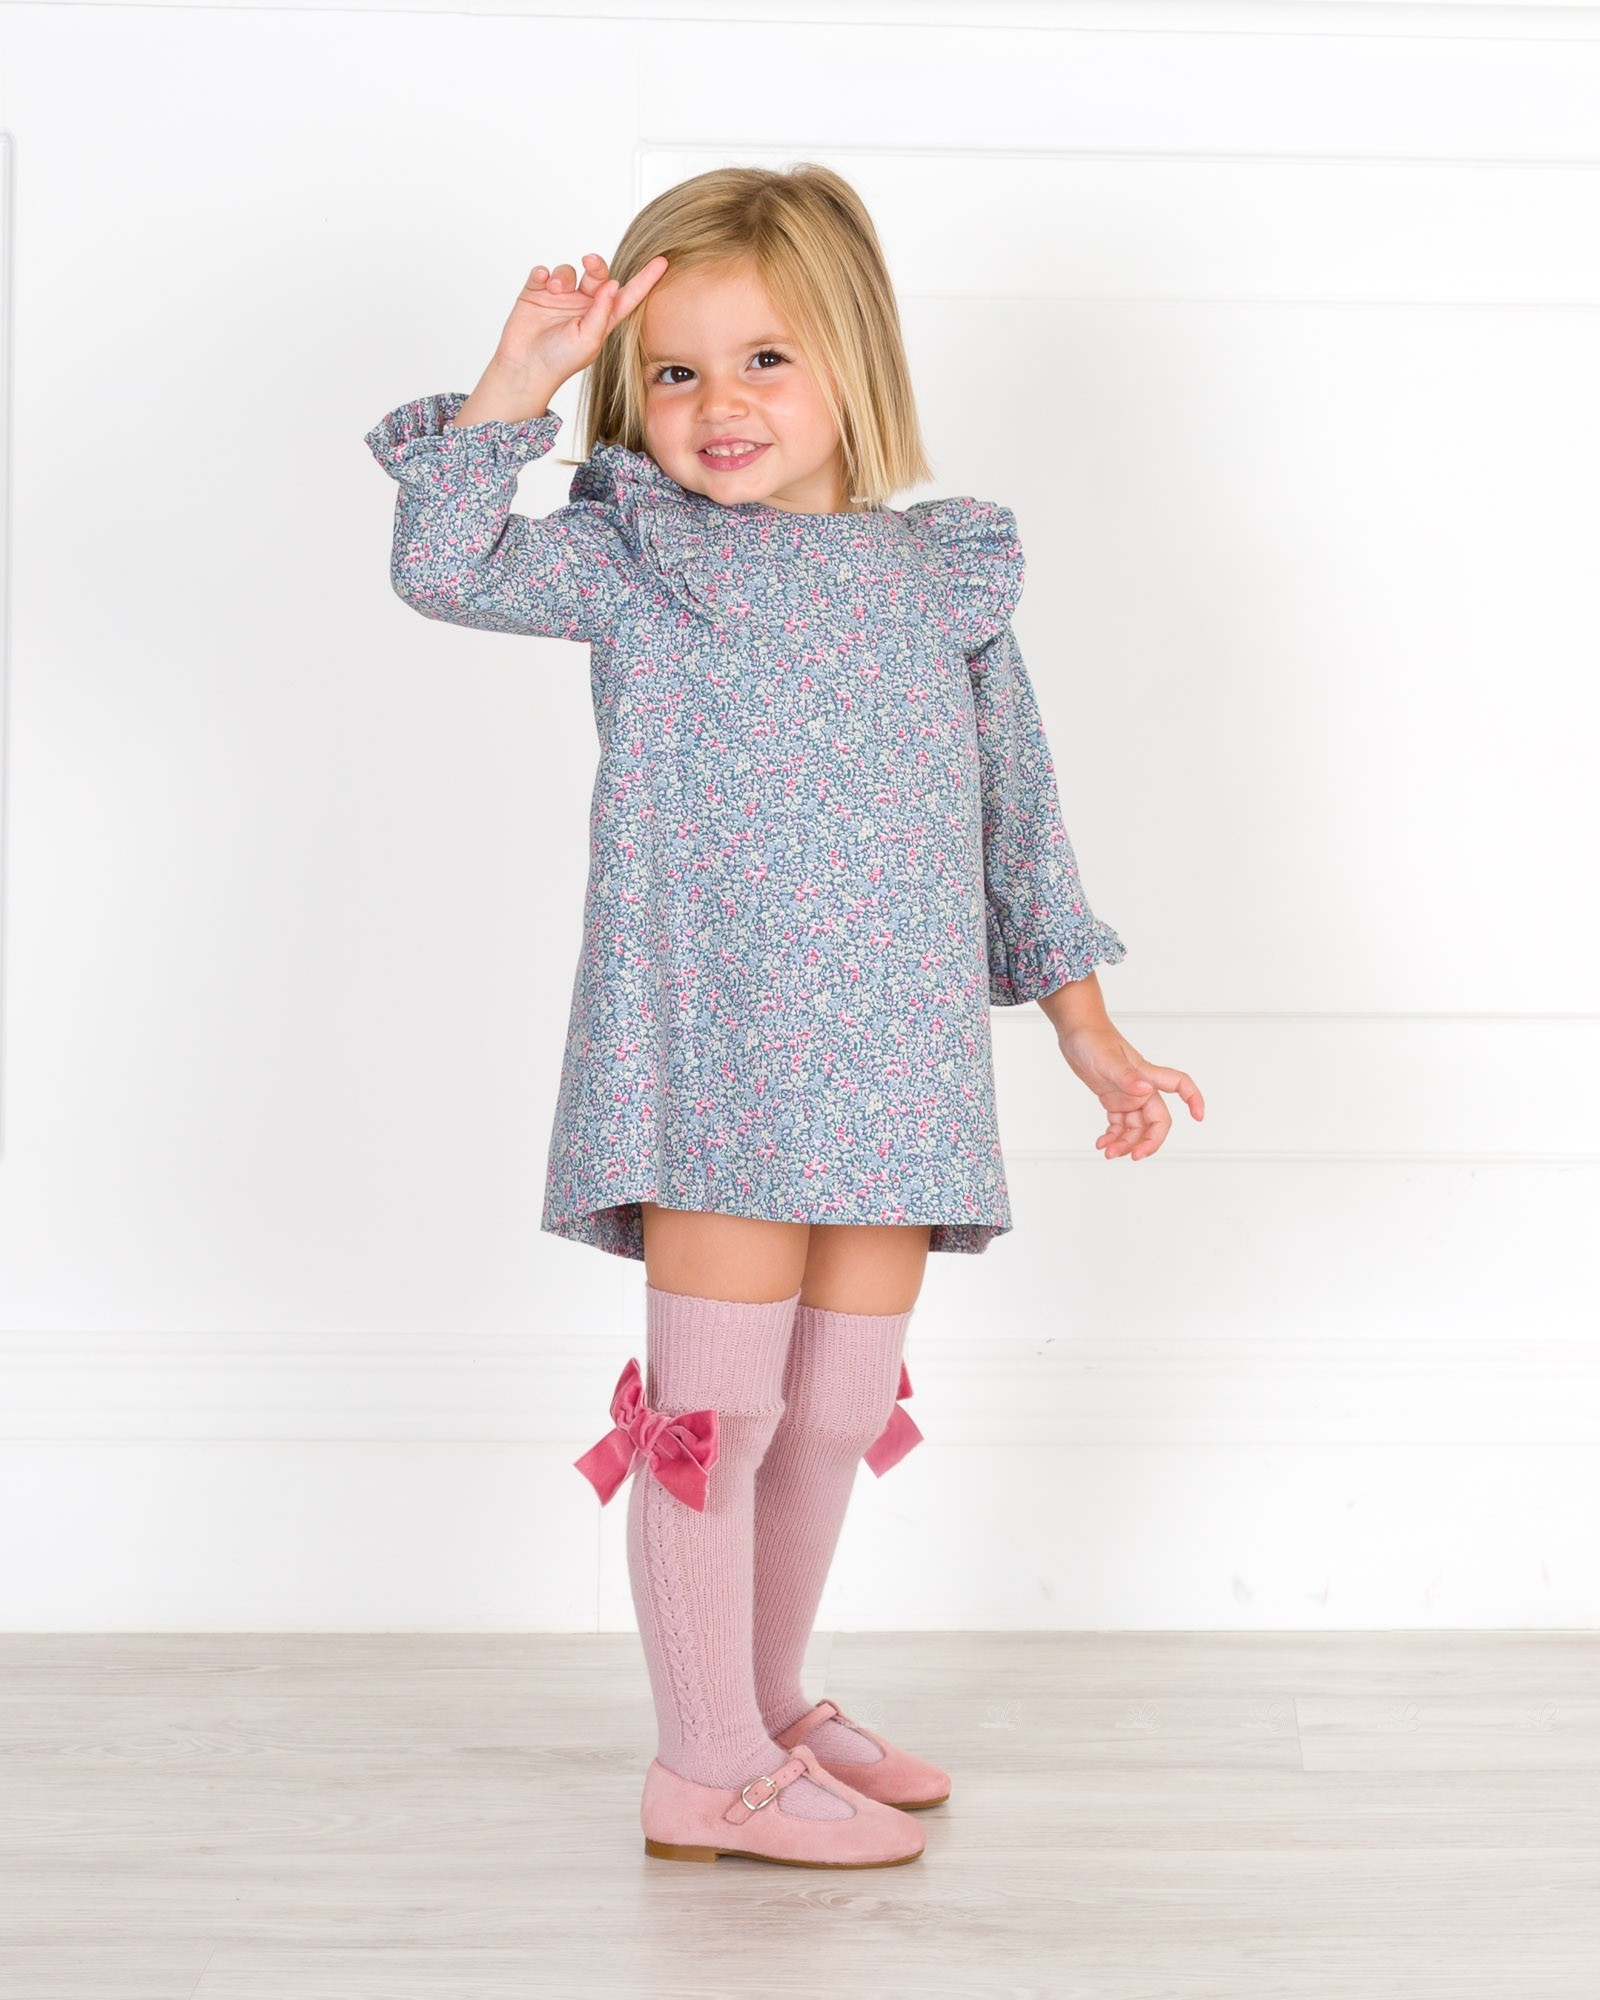 Girls Blue & Pink Liberty Dress Outfit with Pale Pink Long Socks | Missbaby